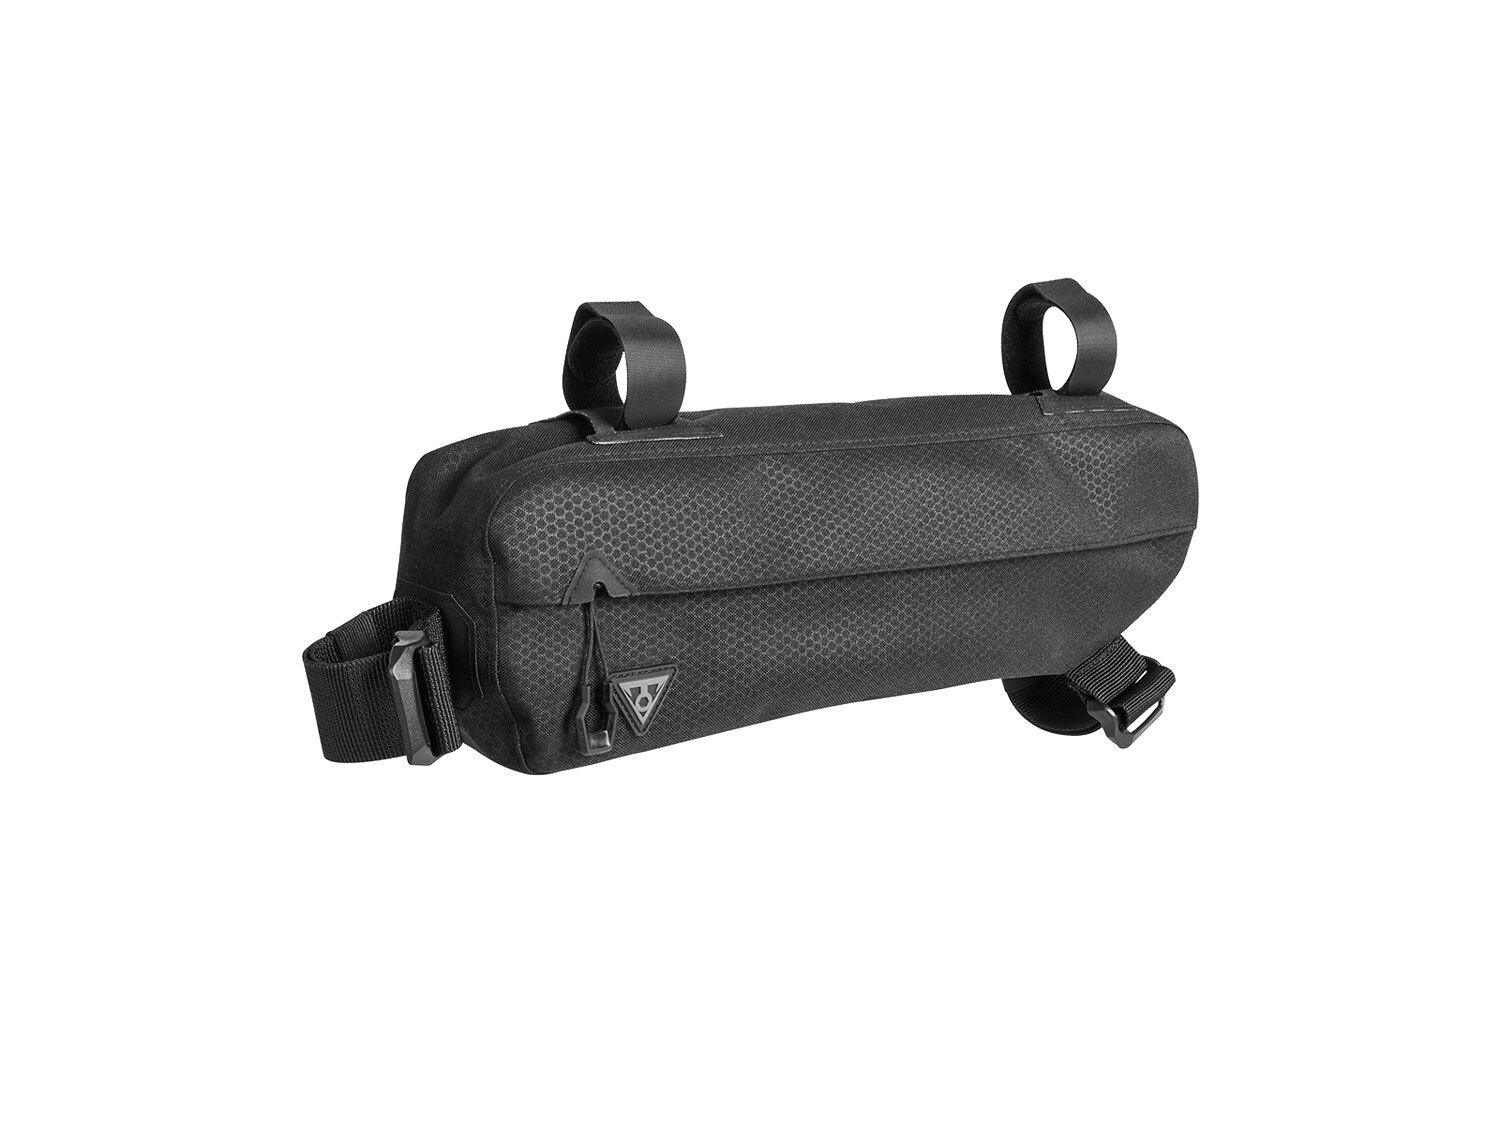 Cycle Frame Bags Australia New Featured Cycle Frame Bags At Best Prices Dhgate Australia